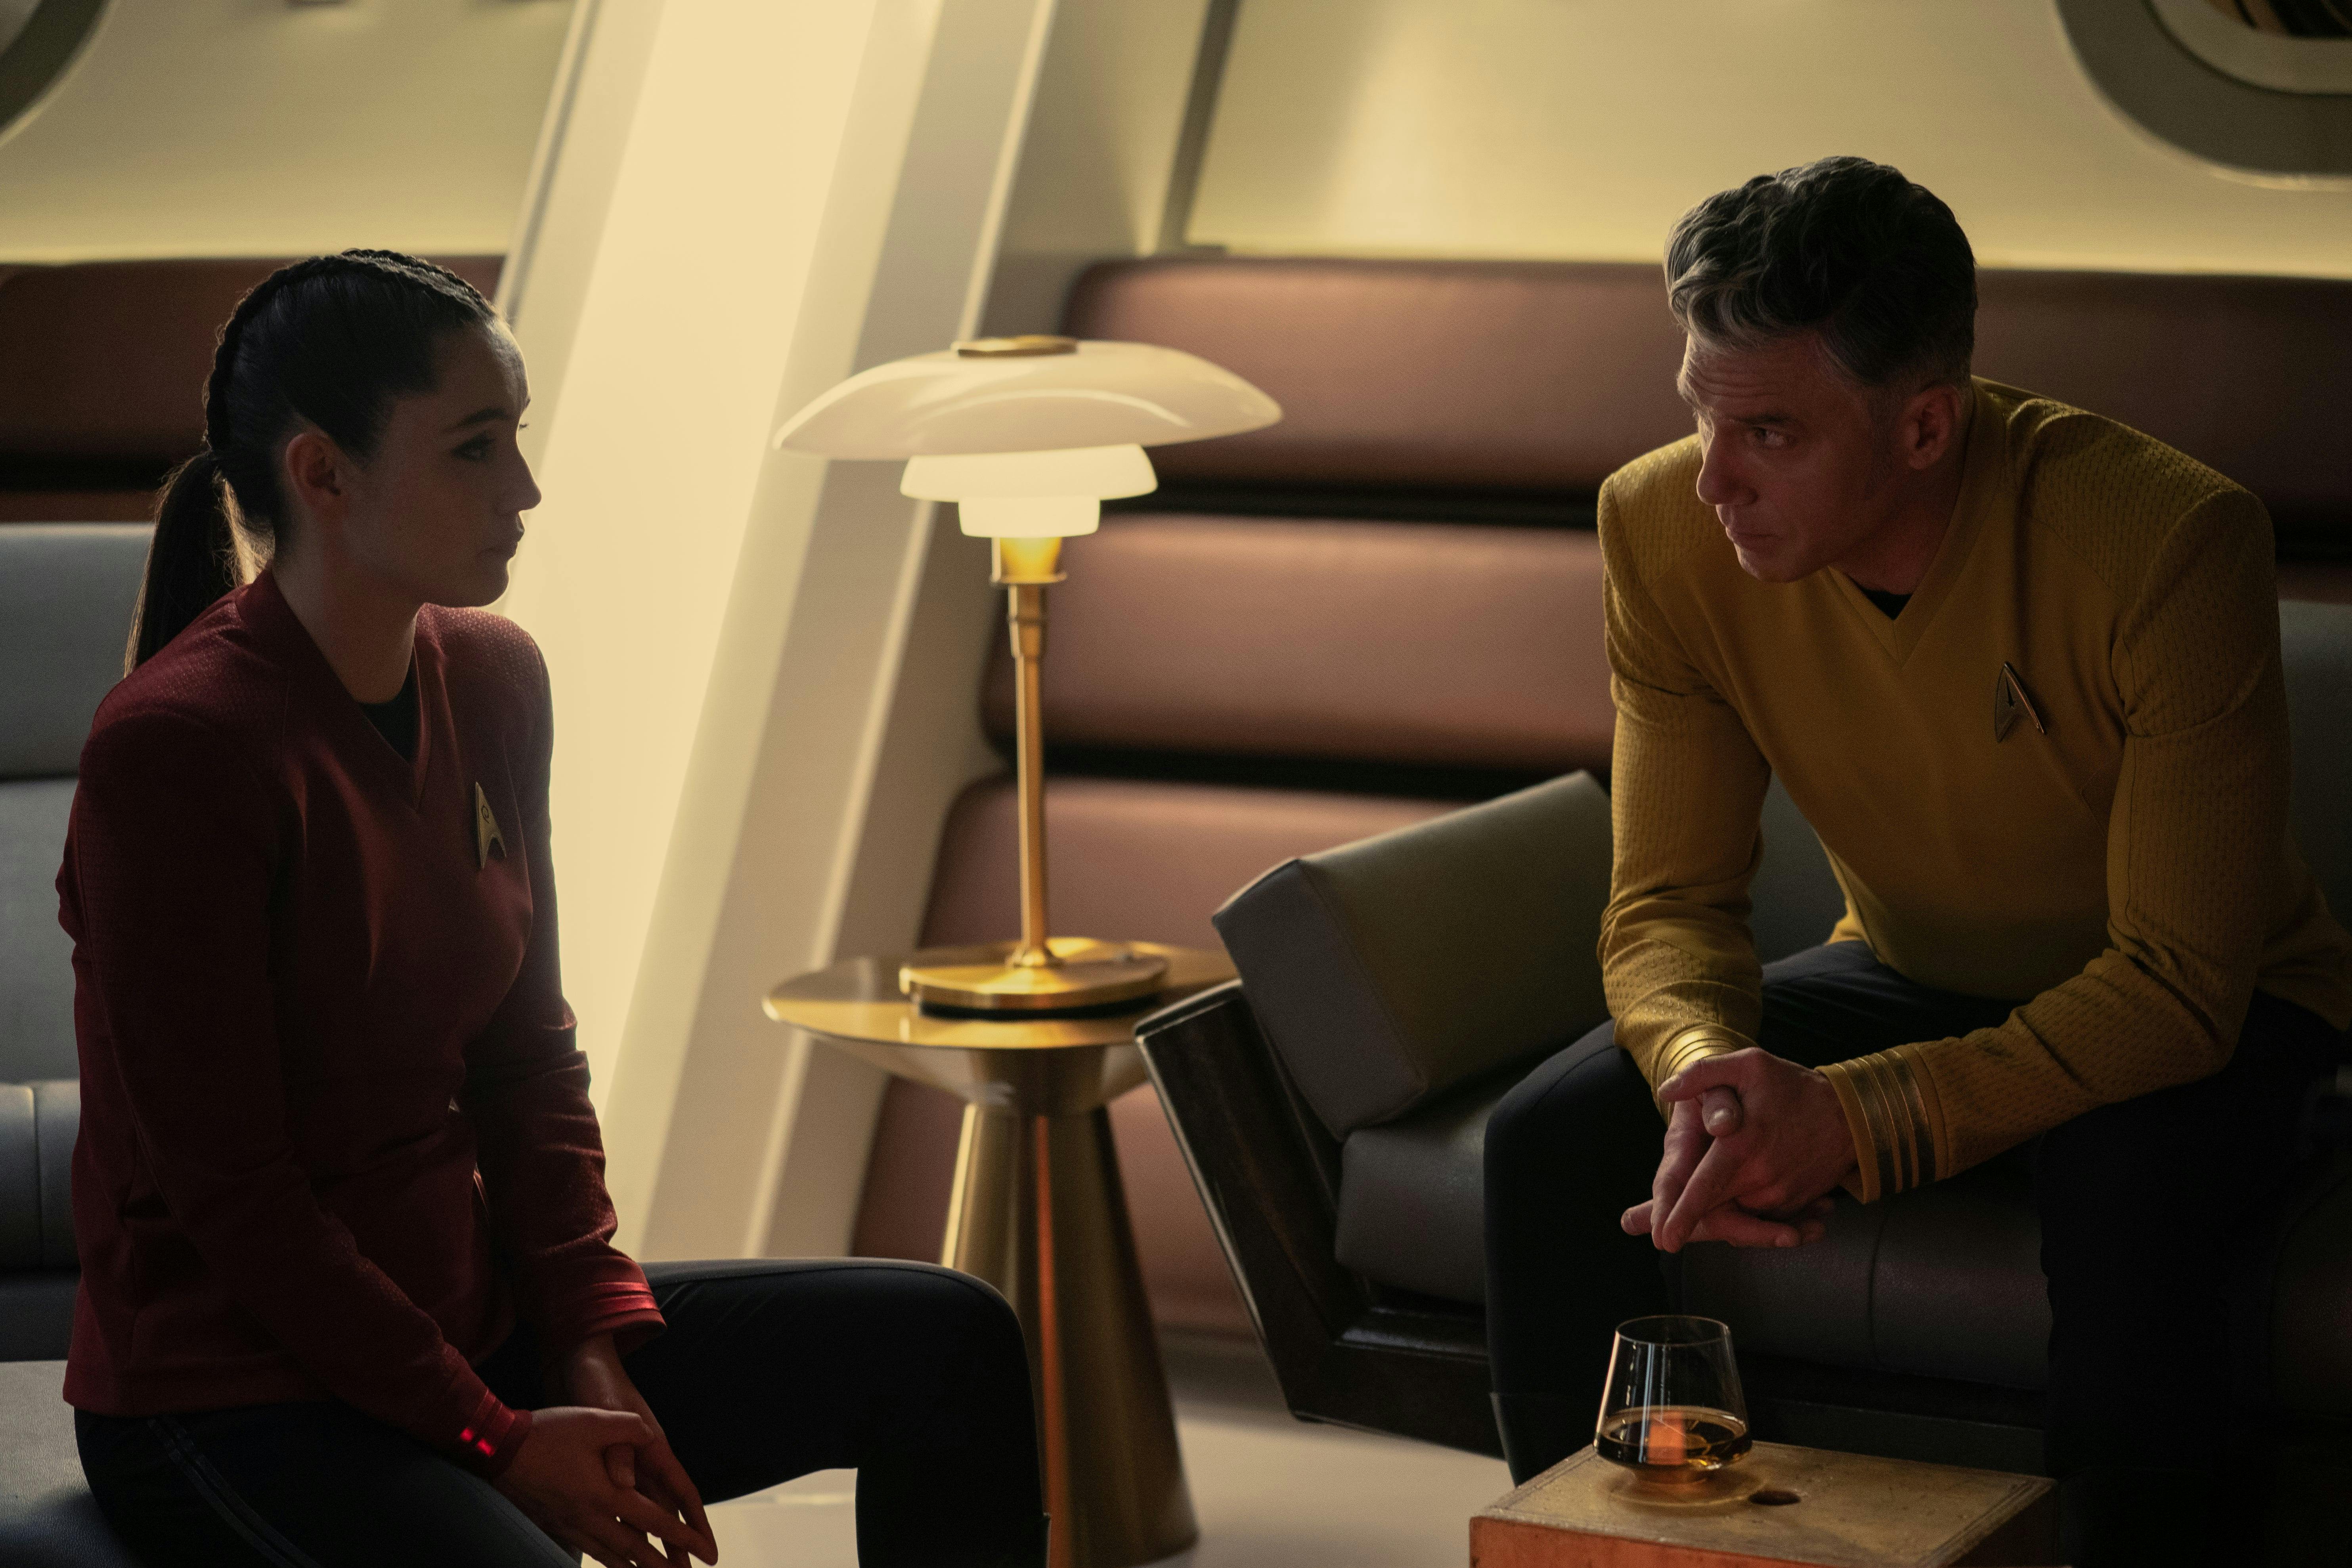 Captain Pike (Anson Mount) is in conference with La'An (Christina Chong) in his ready room.